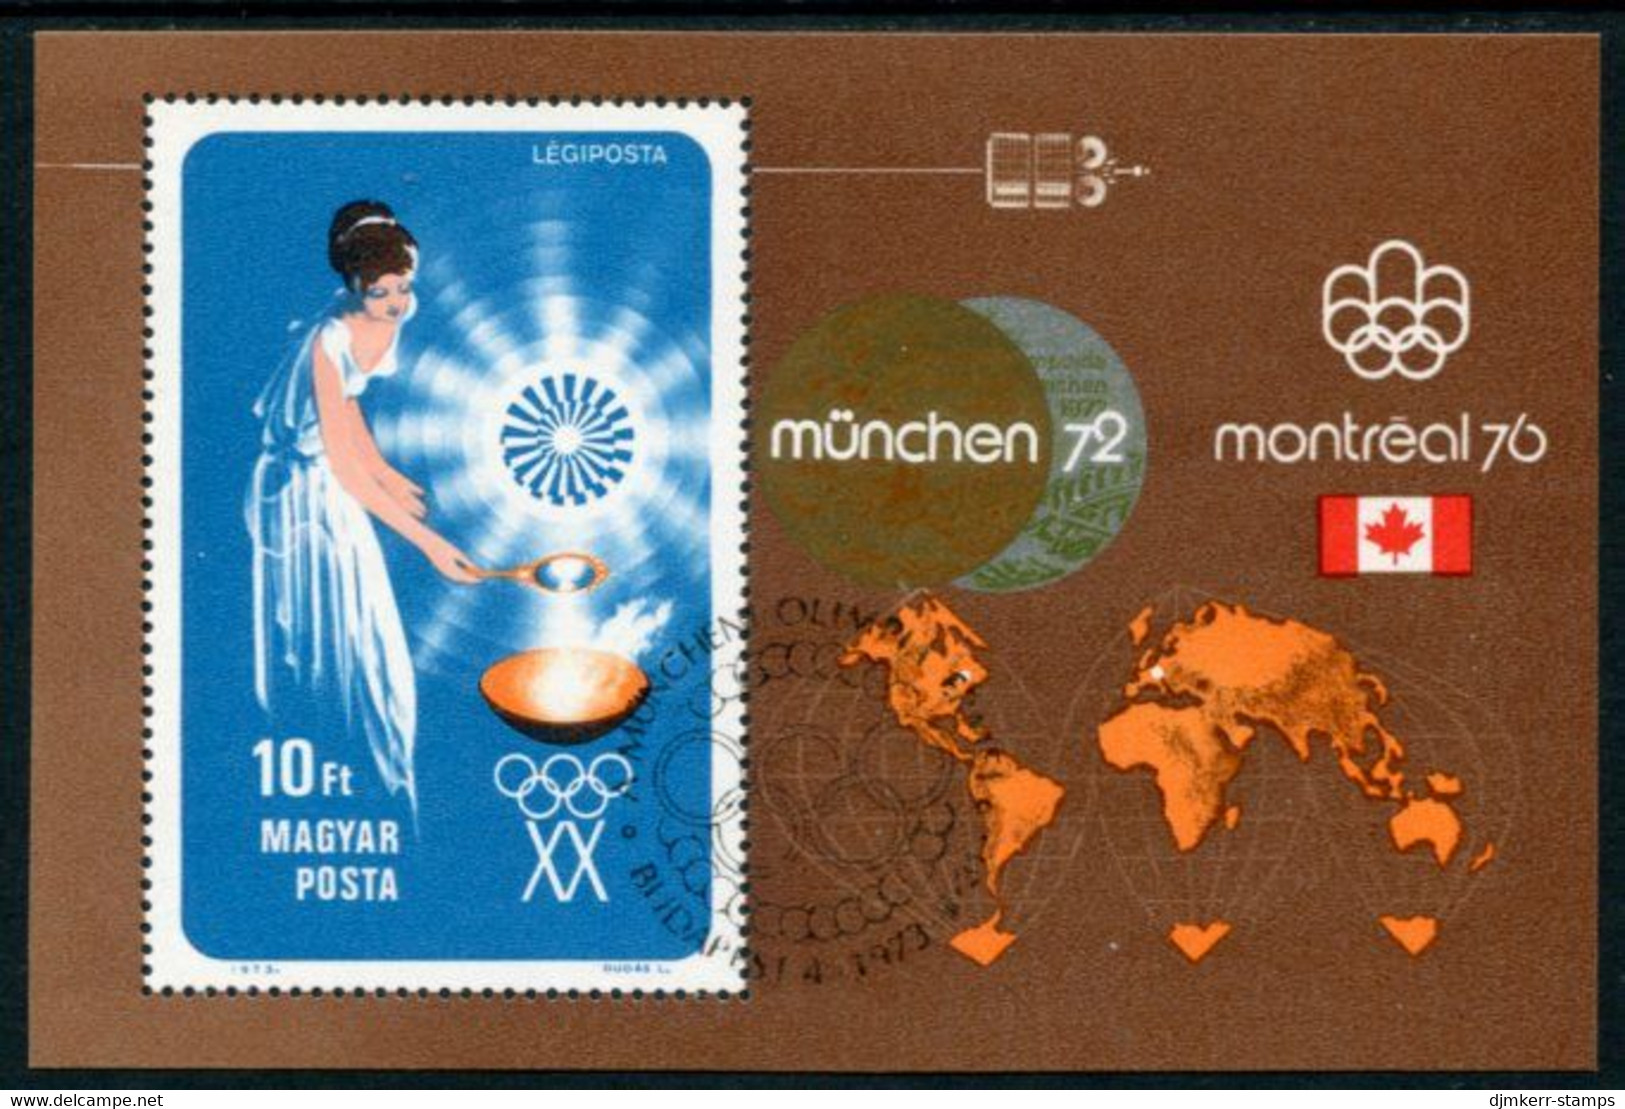 HUNGARY 1973 Olympic Games Publicity Block Used.  Michel Block 96 - Usado